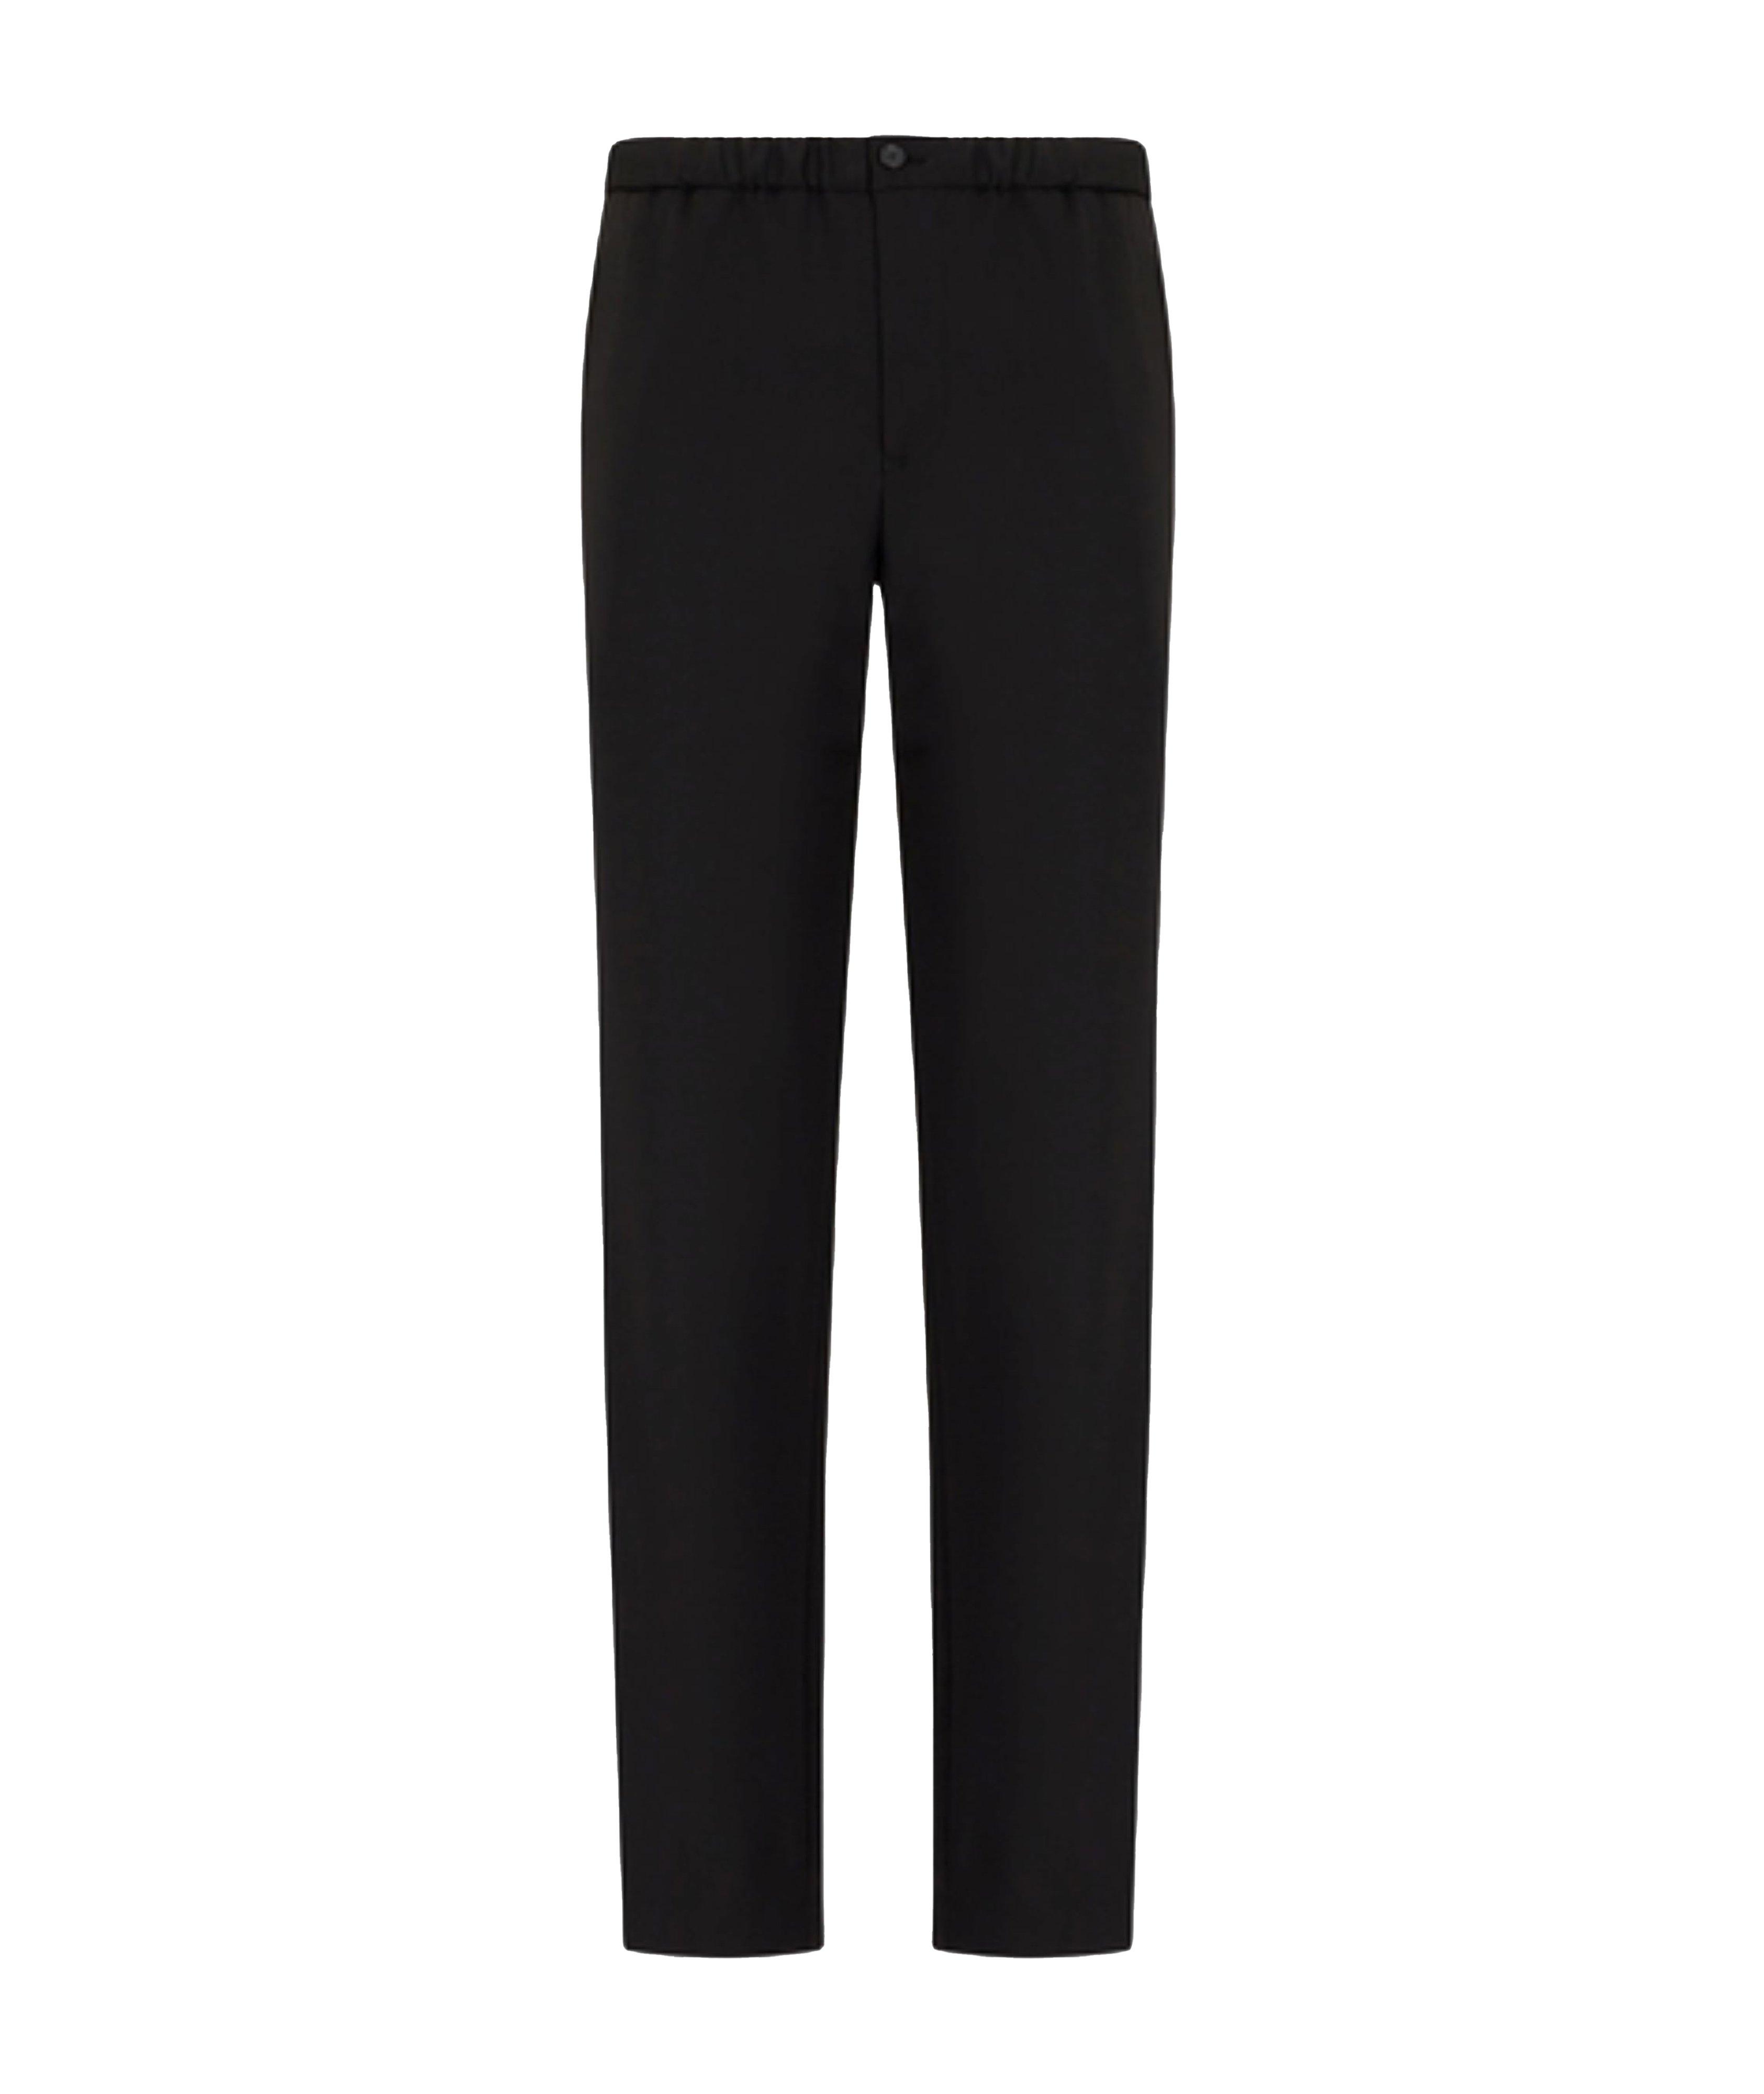 Wool Trousers image 0